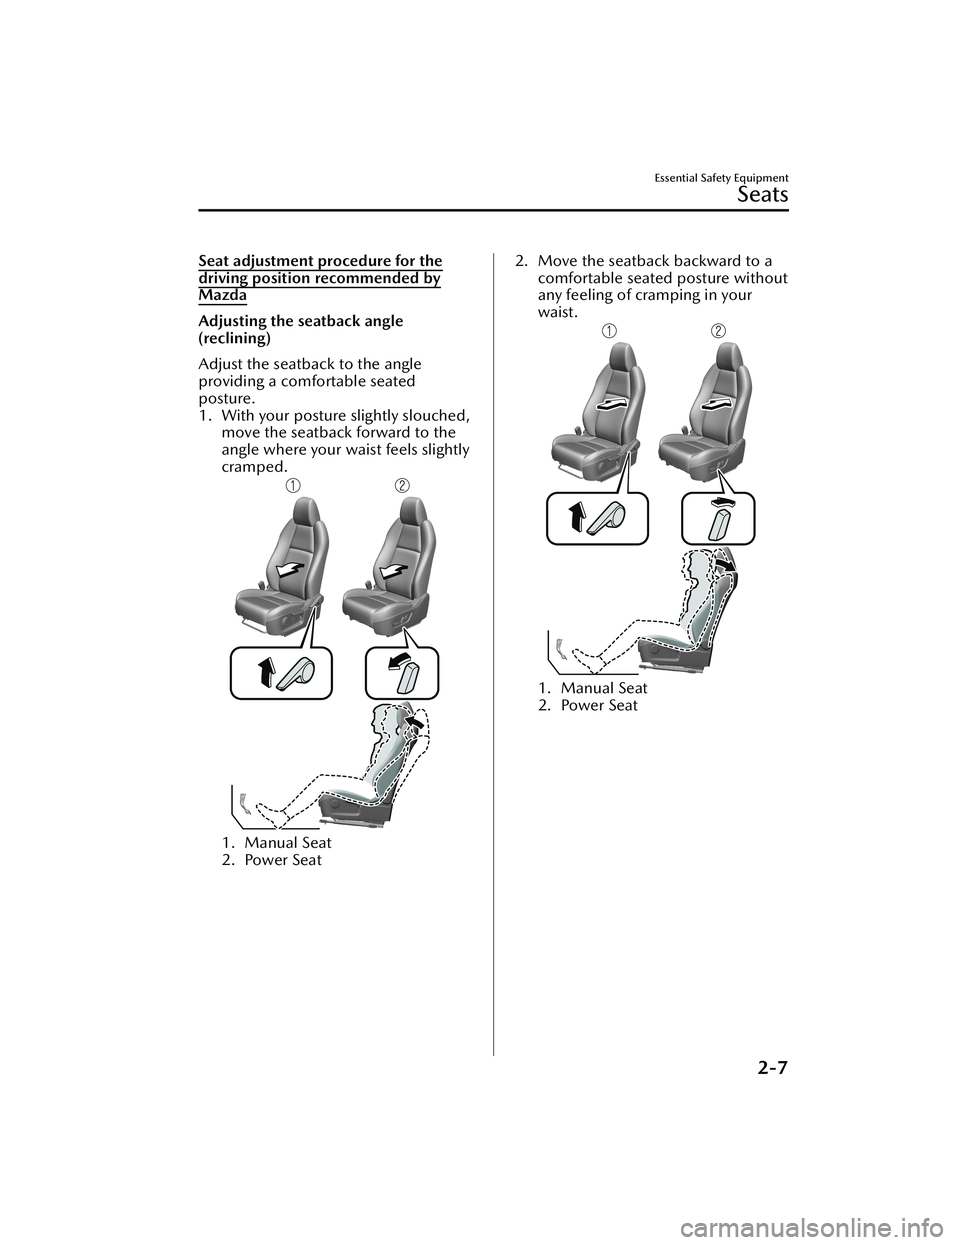 MAZDA MODEL CX-30 2021 Owners Manual Seat adjustment procedure for the
driving position recommended by
Mazda
Adjusting the seatback angle
(reclining)
Adjust the seatback to the angle
providing a comfortable seated
posture.
1. With your p